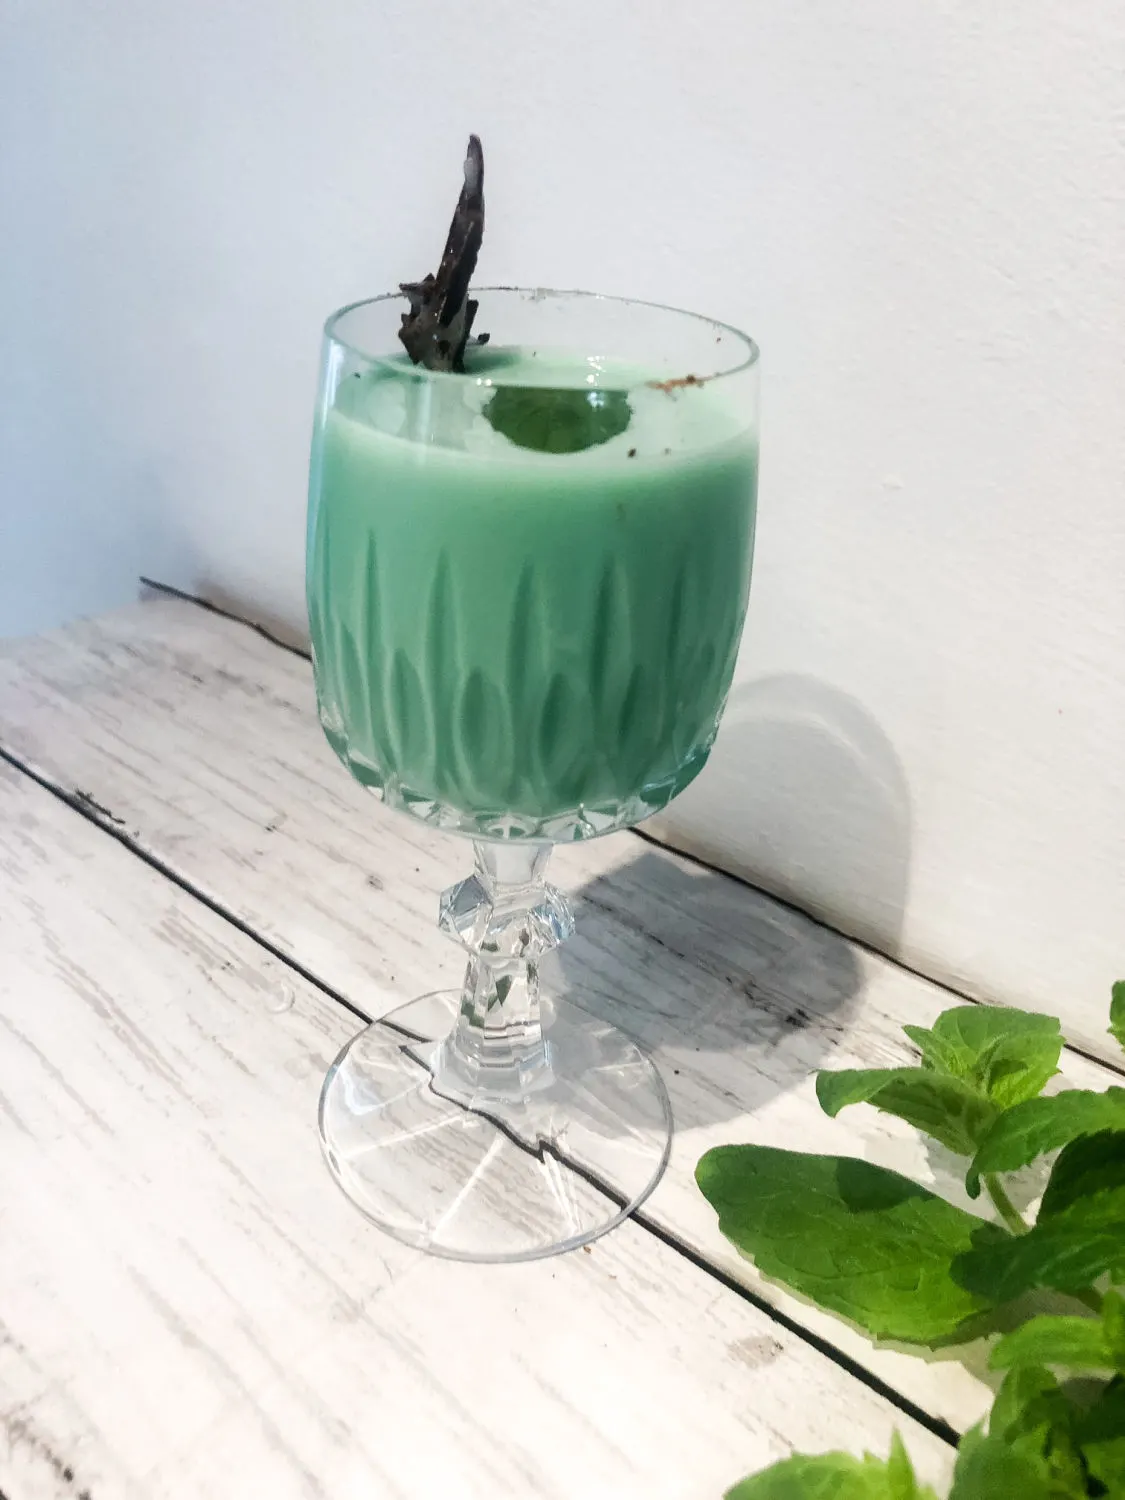 After eight cocktail